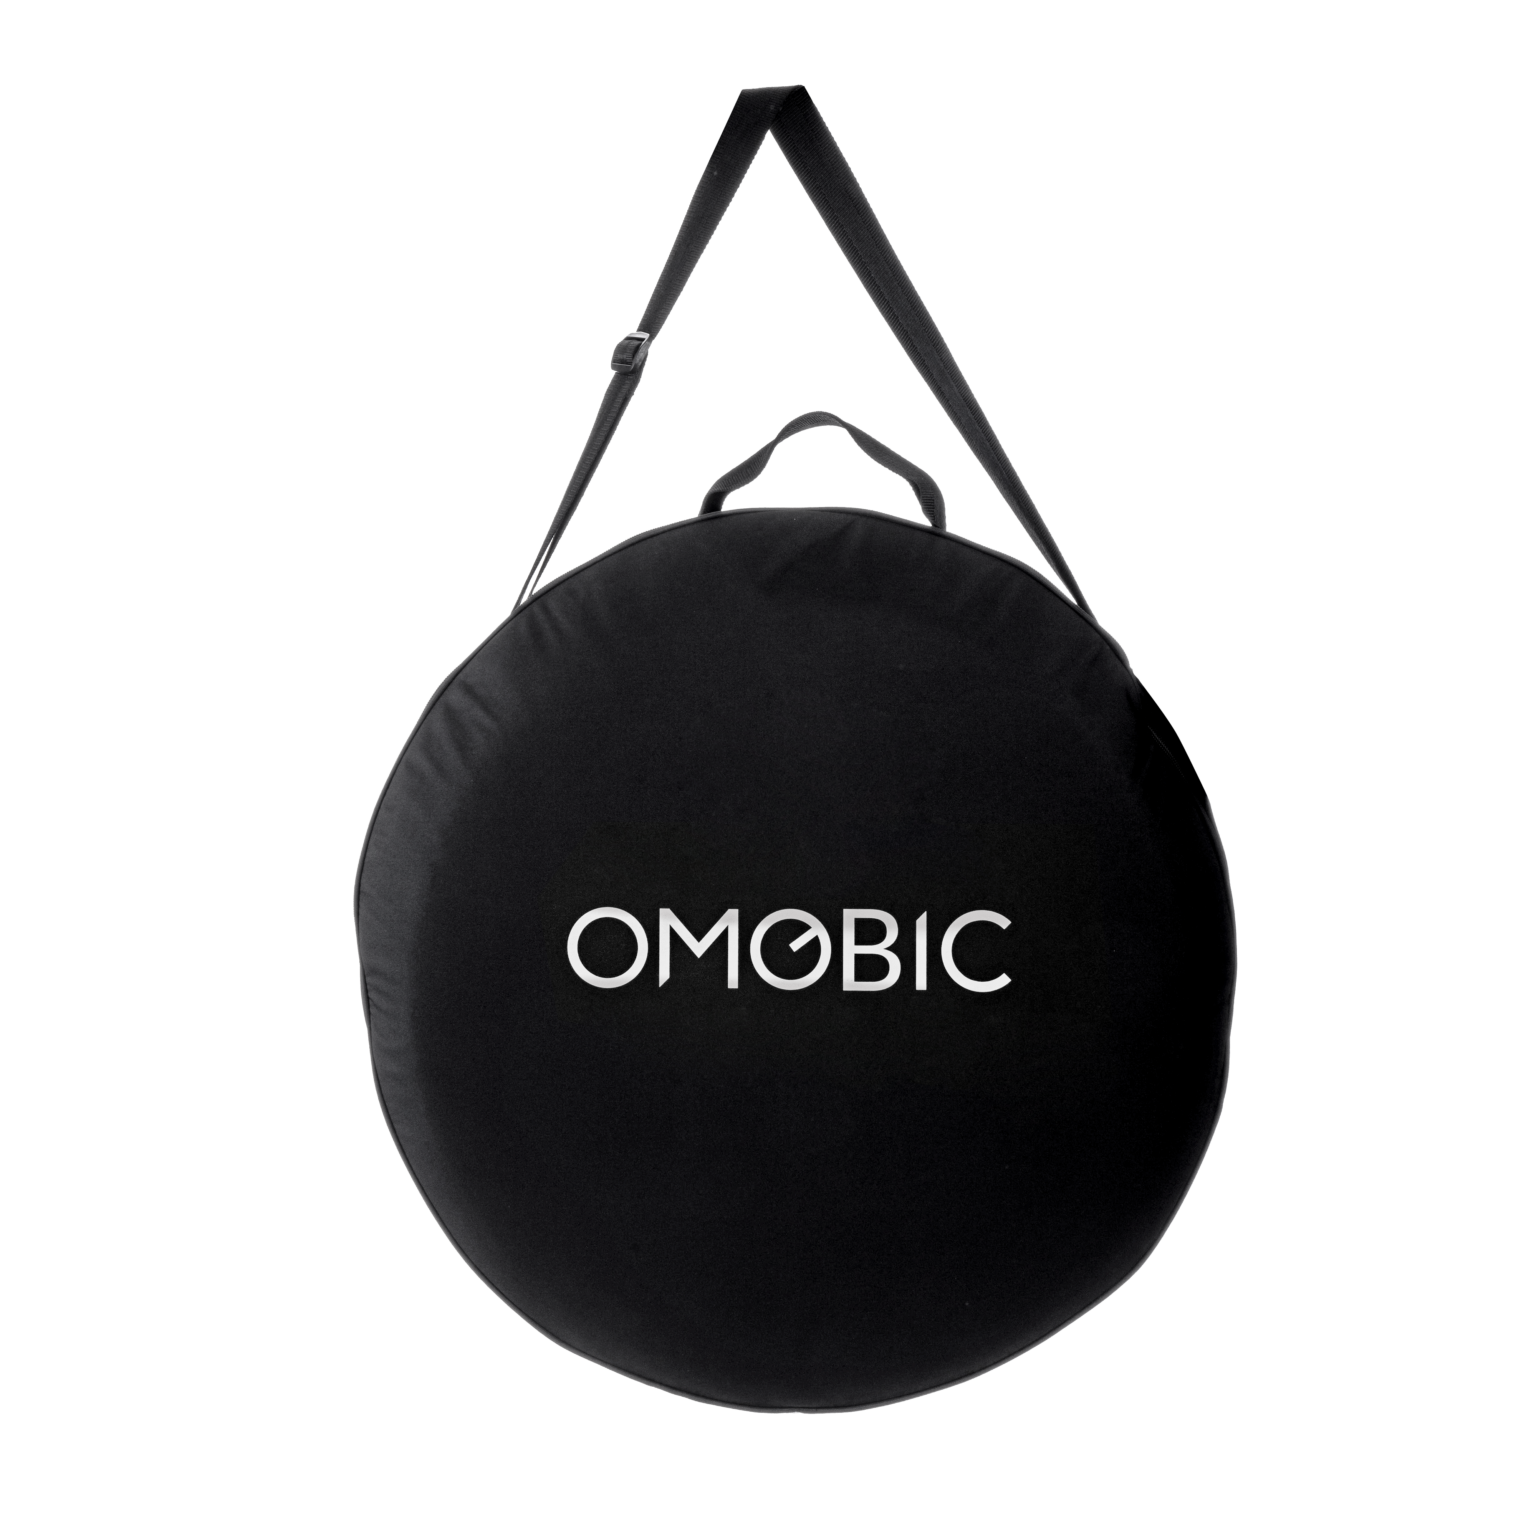 Omobic BAGG - bag for 4 wheels for wheelchair front